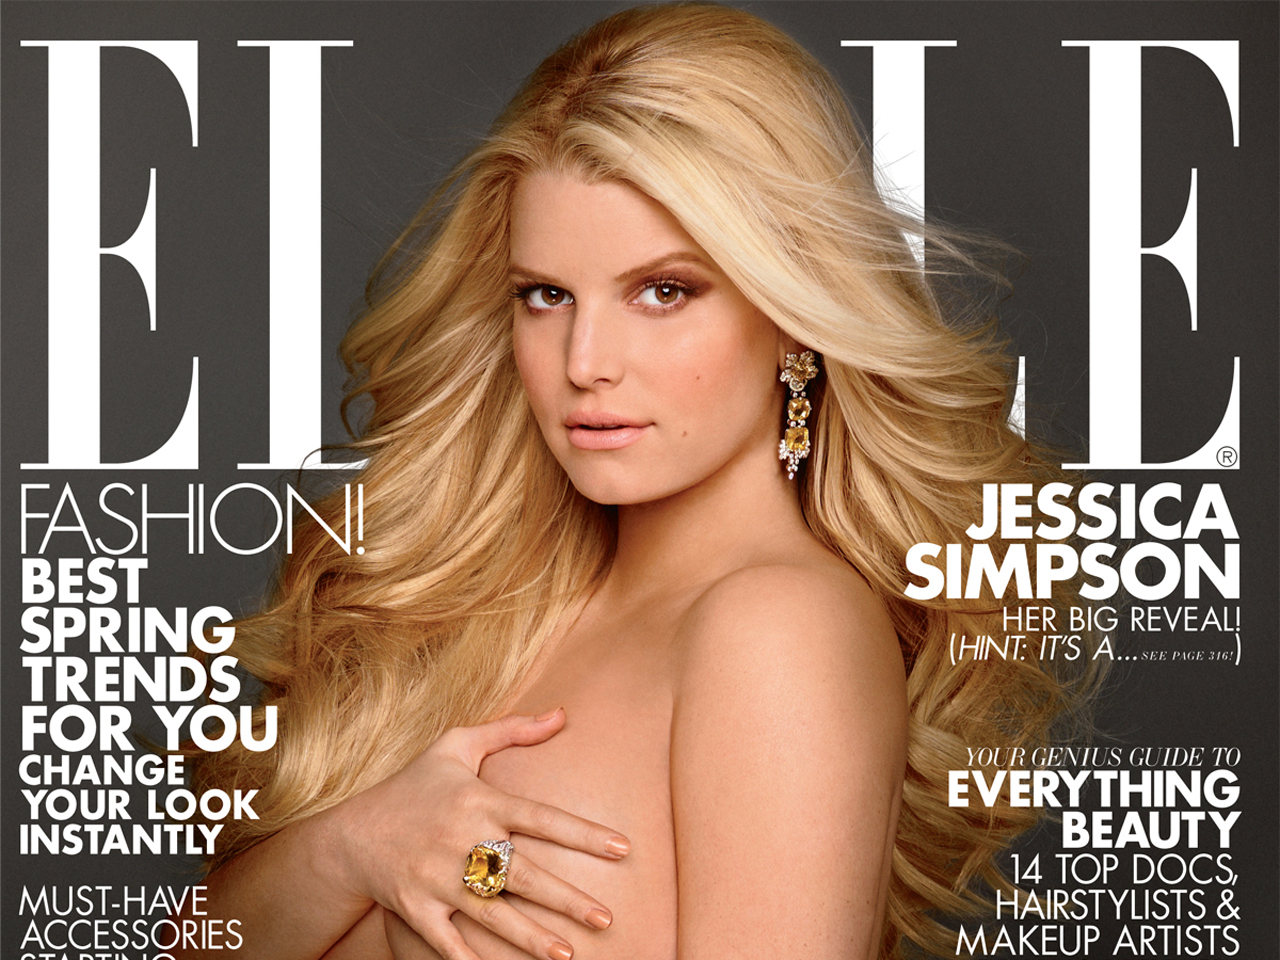 Jessica Simpson Sex Tape - Jessica Simpson poses nude on ELLE cover, says she's having a girl - CBS  News